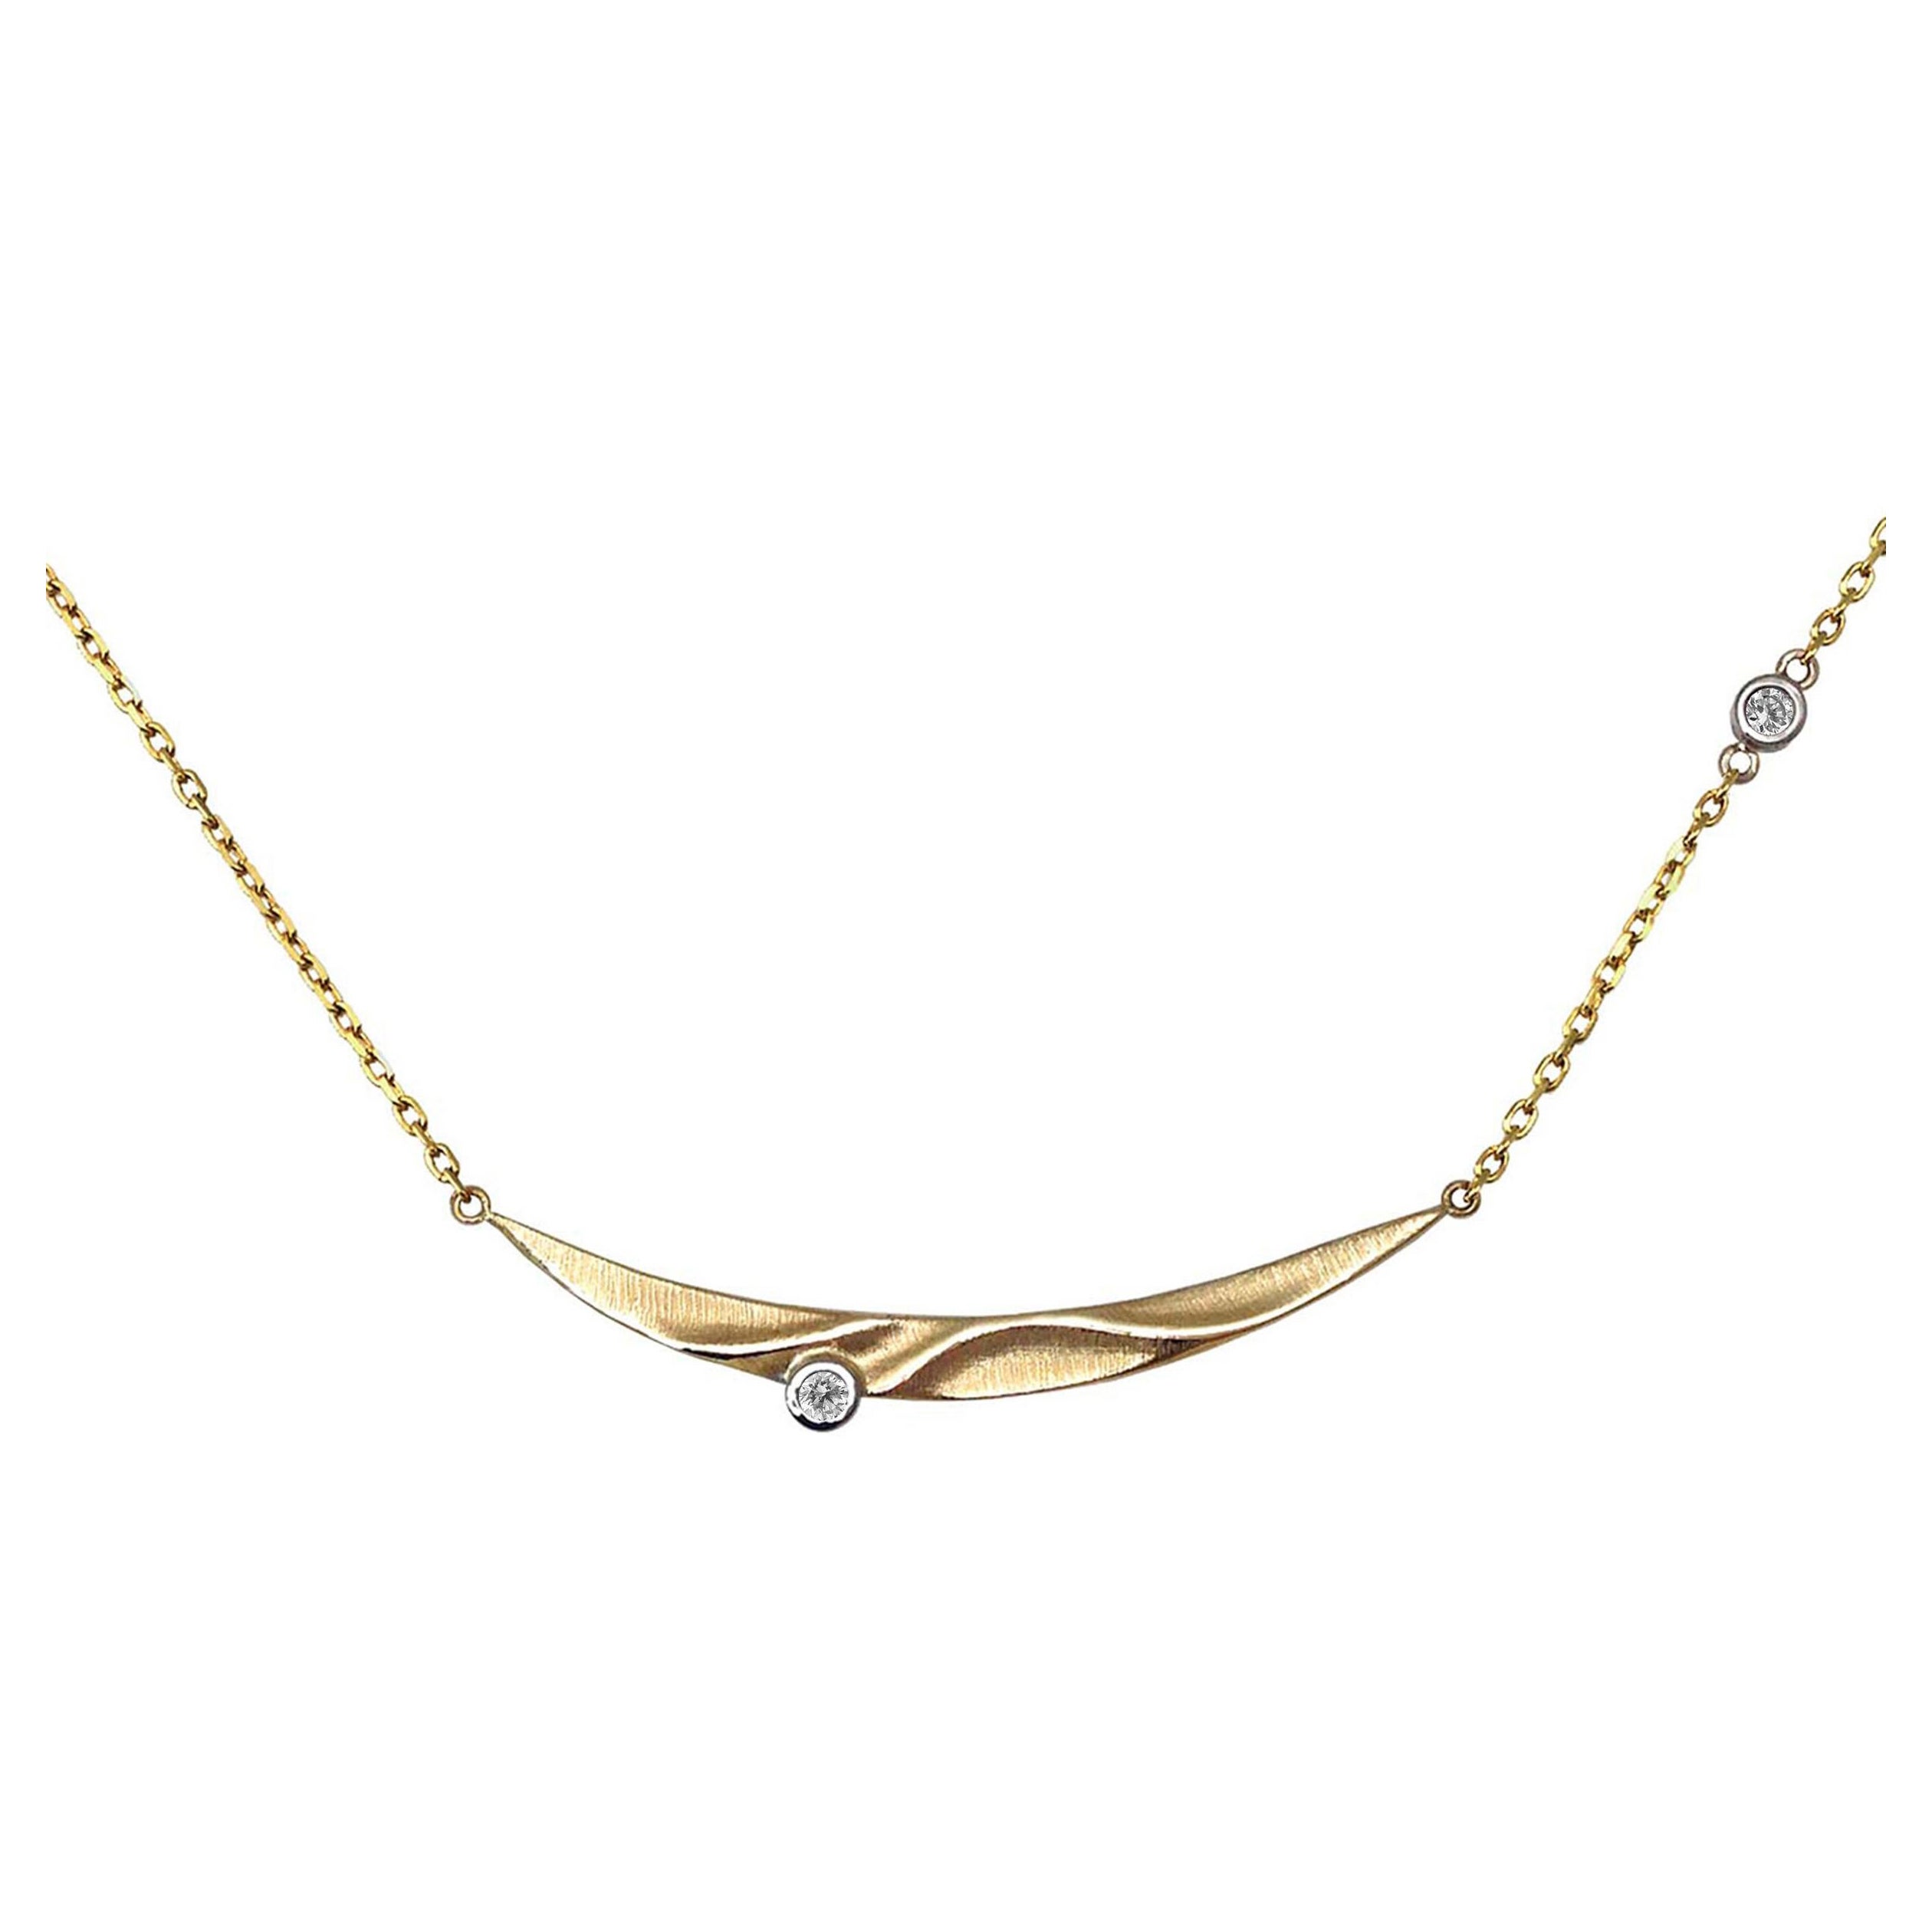 14 Karat Gold Seaside Necklace with Diamond Accents and an Adjustable Chain